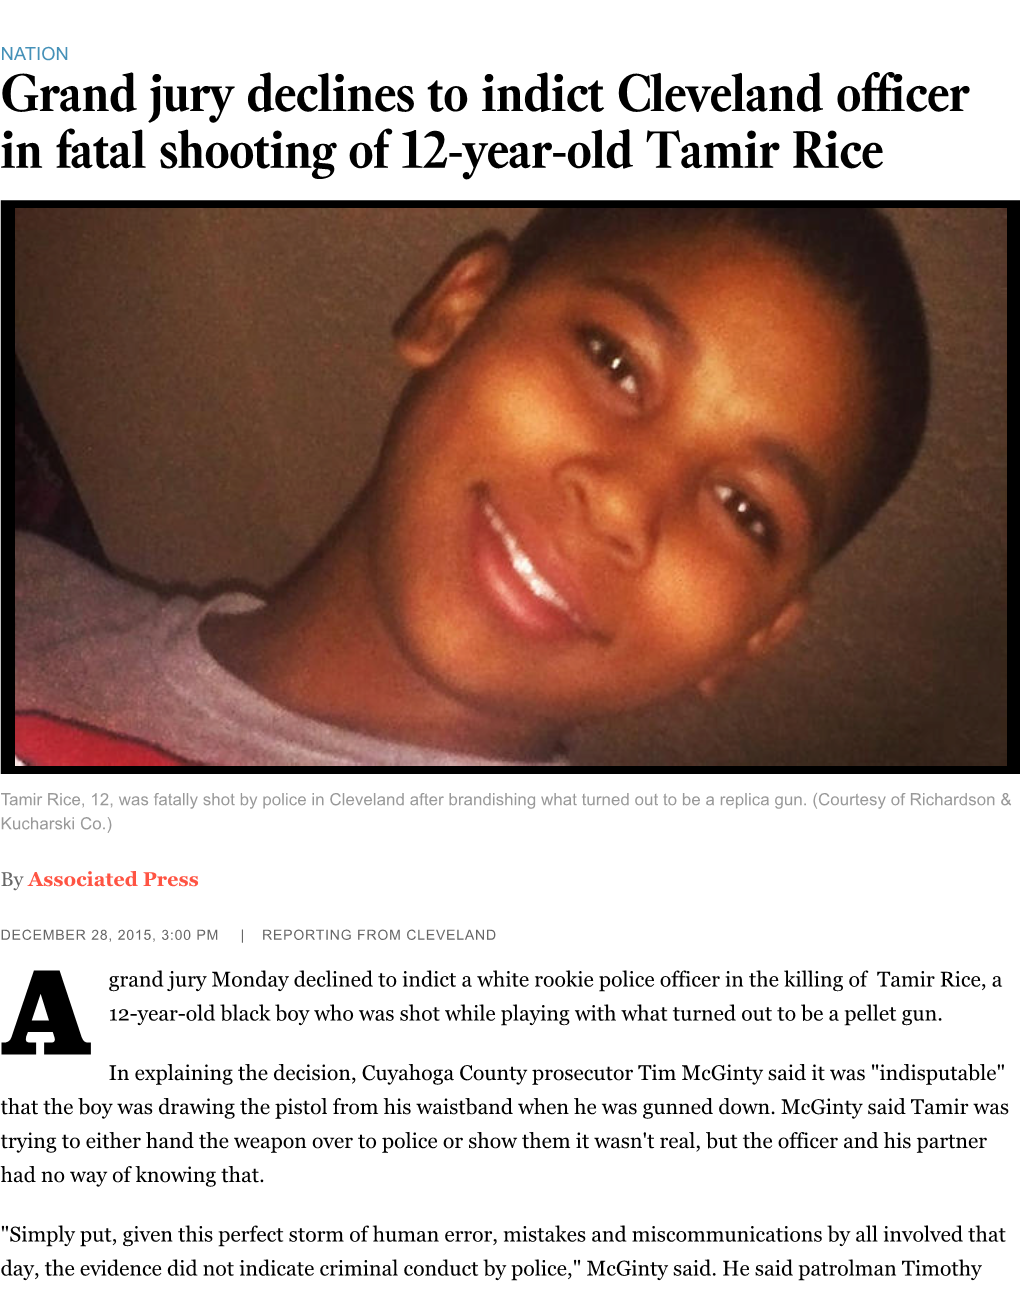 Grand Jury Declines to Indict Cleveland Officer in Fatal Shooting of 12-Year-Old Tamir Rice